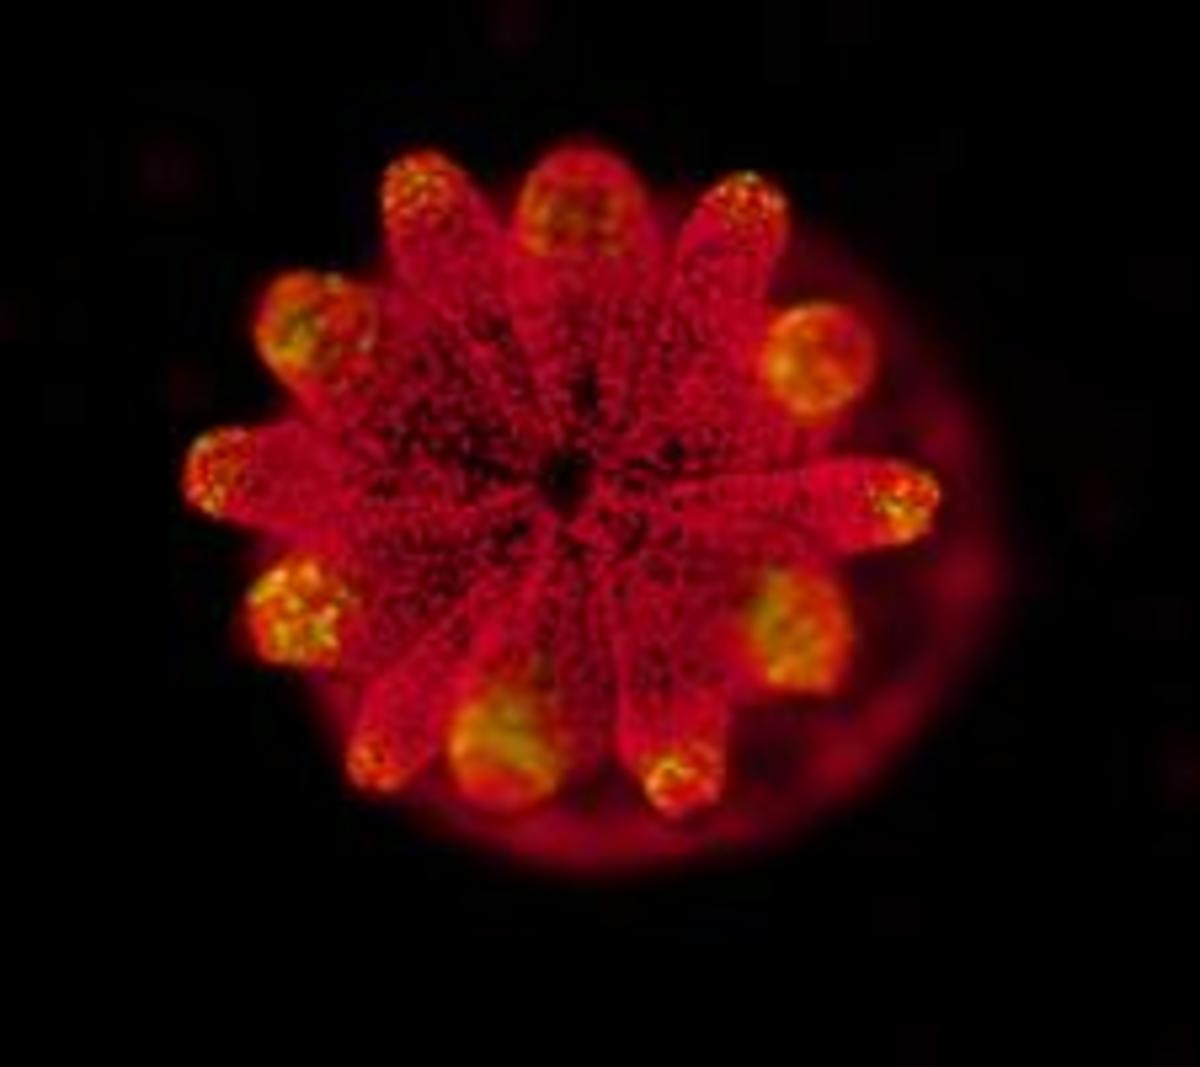 Fluorescence image of one coral Acropora juvenile polyps hosting the symbiotic Symbiodiniaceae, shown as red dots.